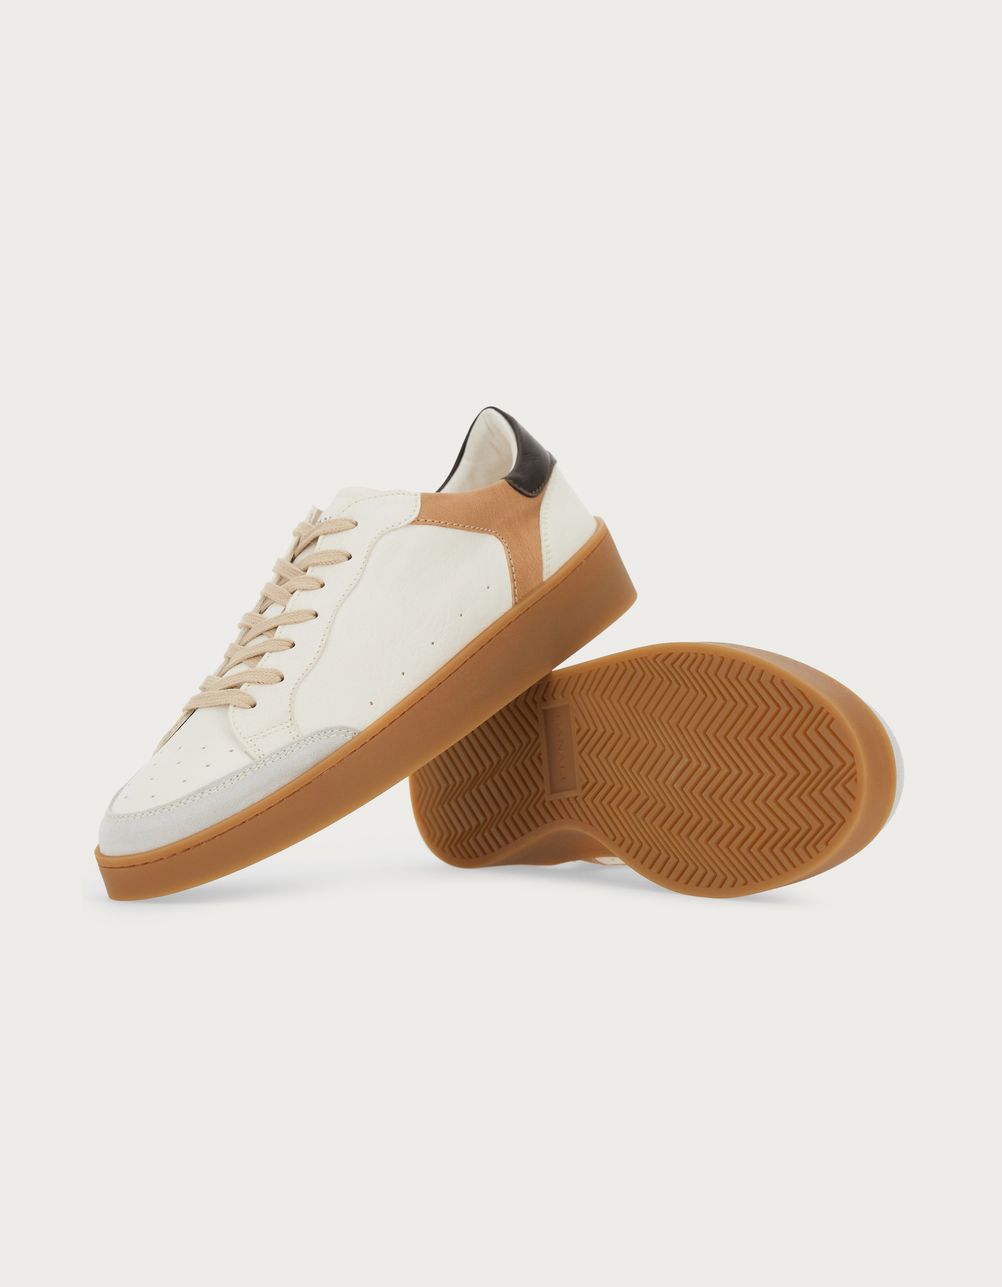 Cream and camel leather and suede sneakers